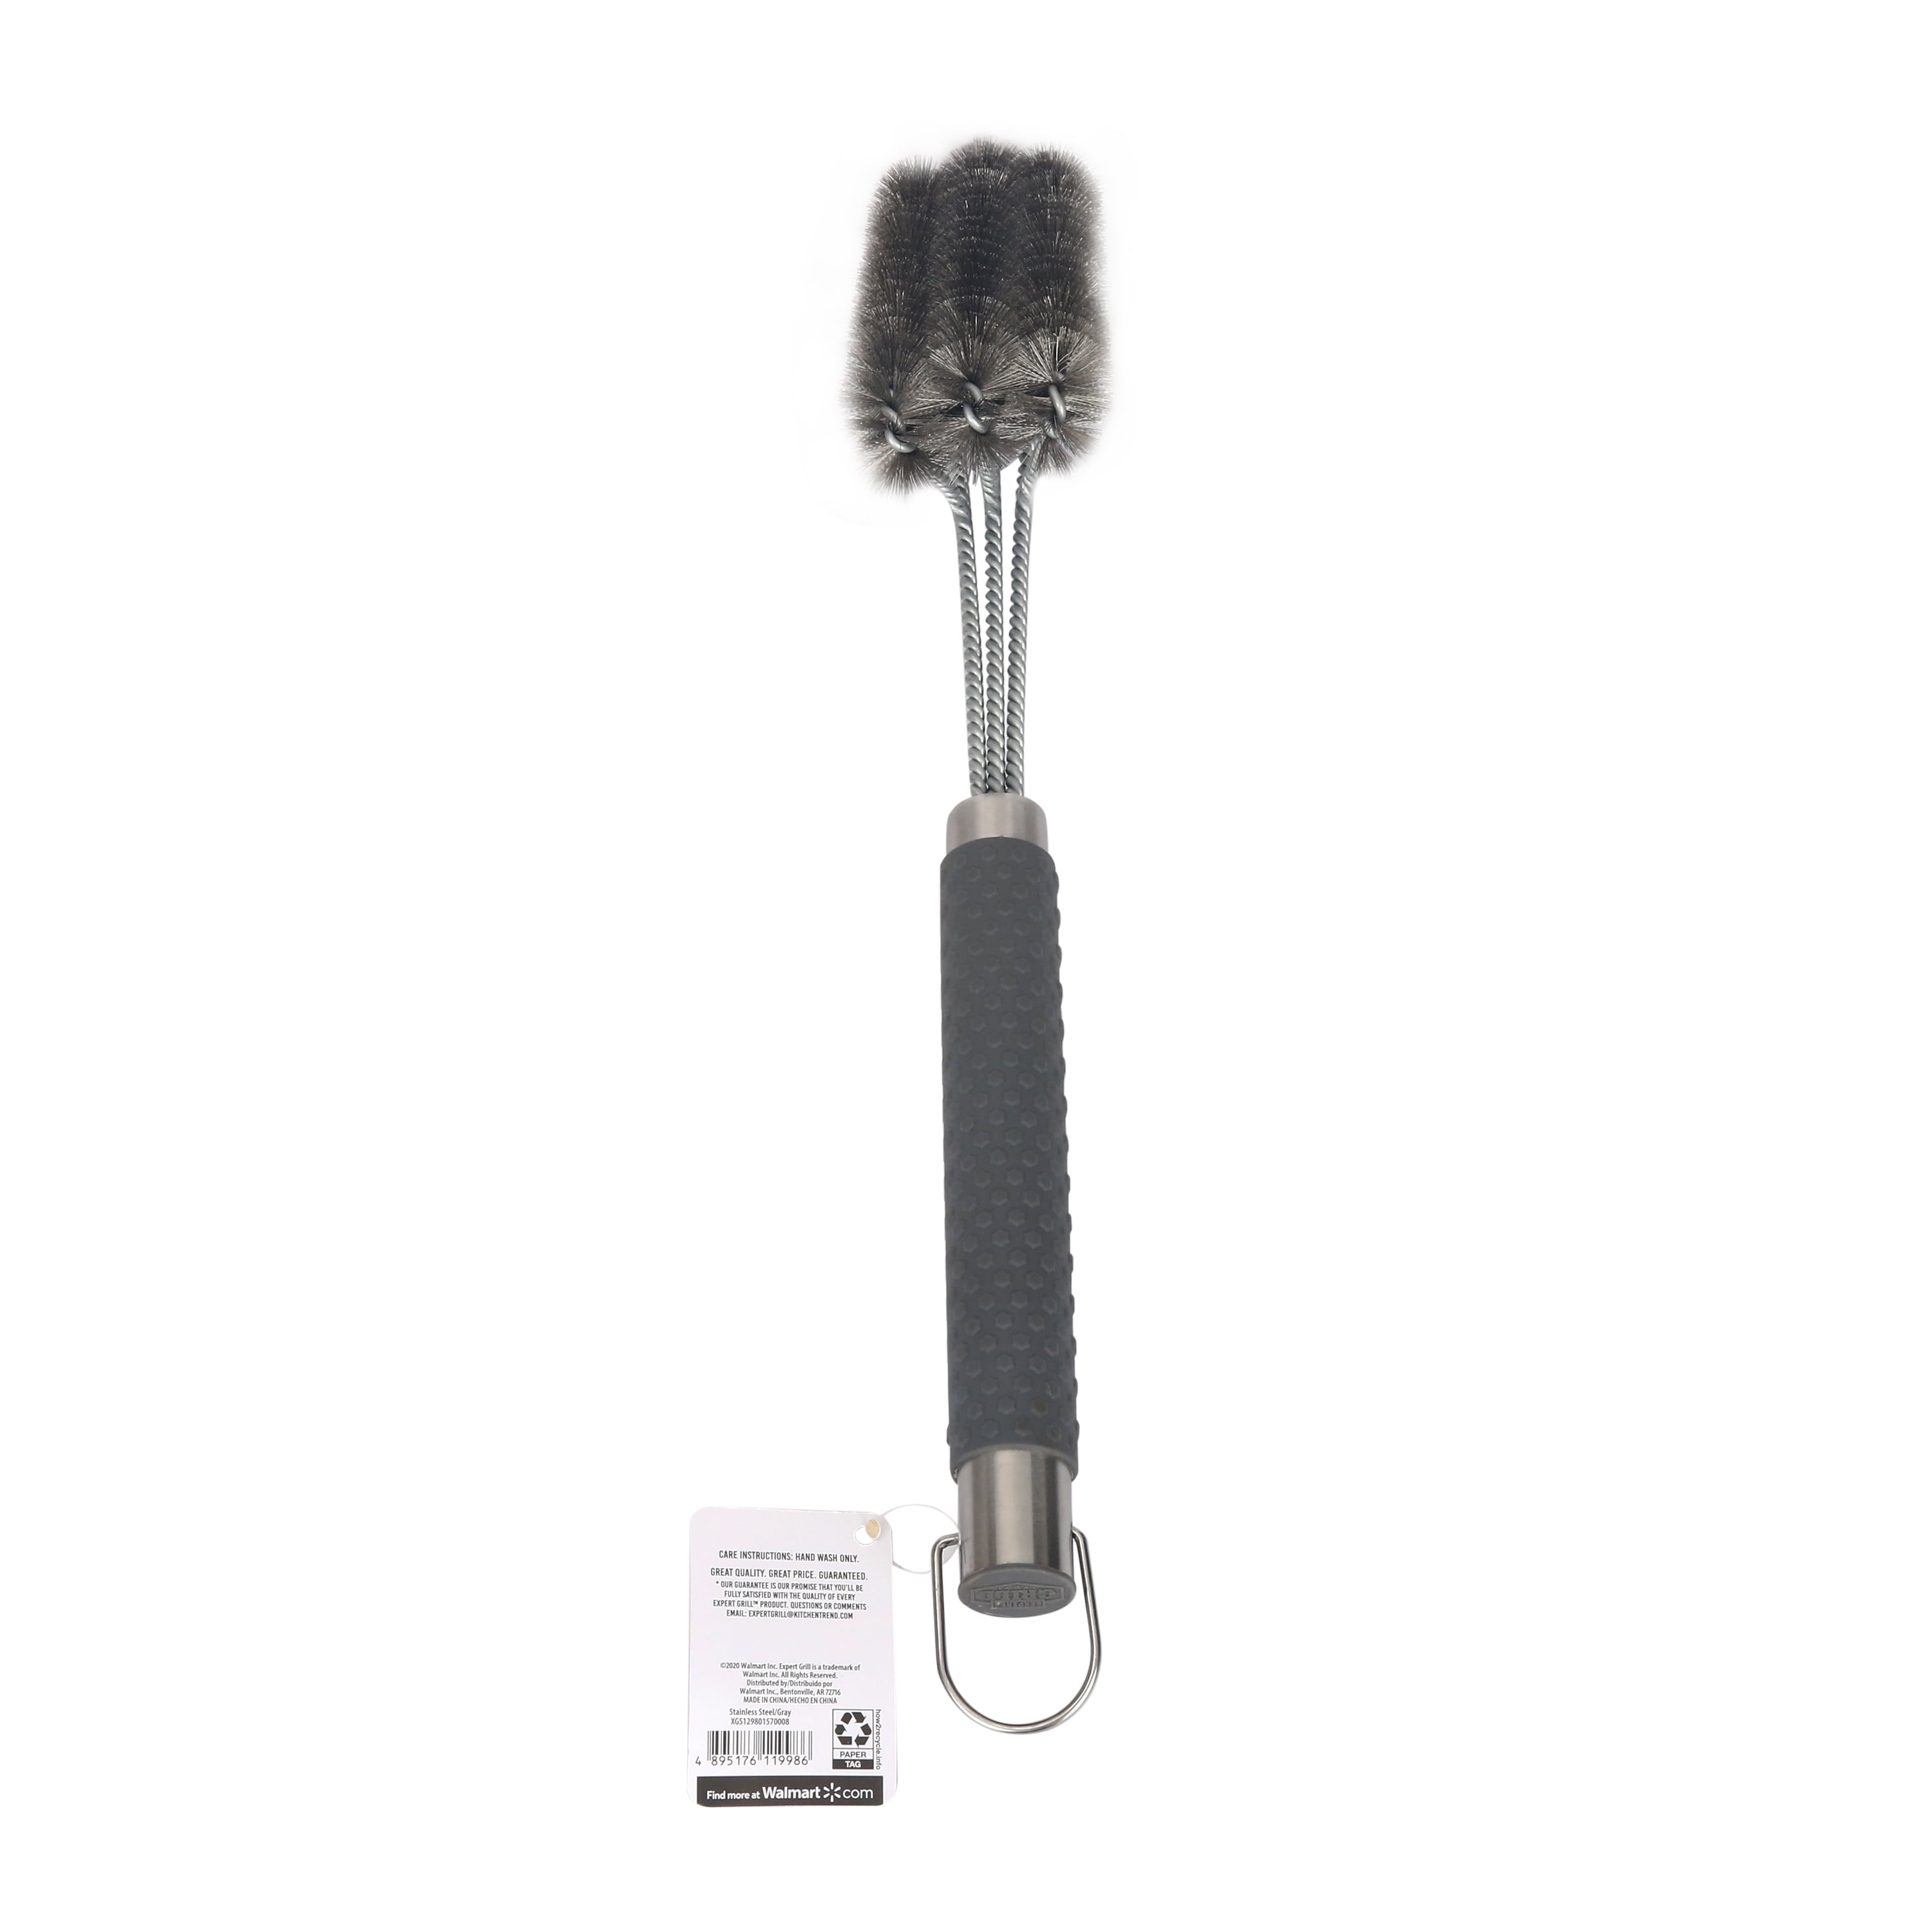 Met Lux 18.5-inch Grill Brush, 1 Durable Grill Cleaning Tool - Triple Head Brush, for All Types of Grills, Silver Stainless Steel 201 Grill Accessory